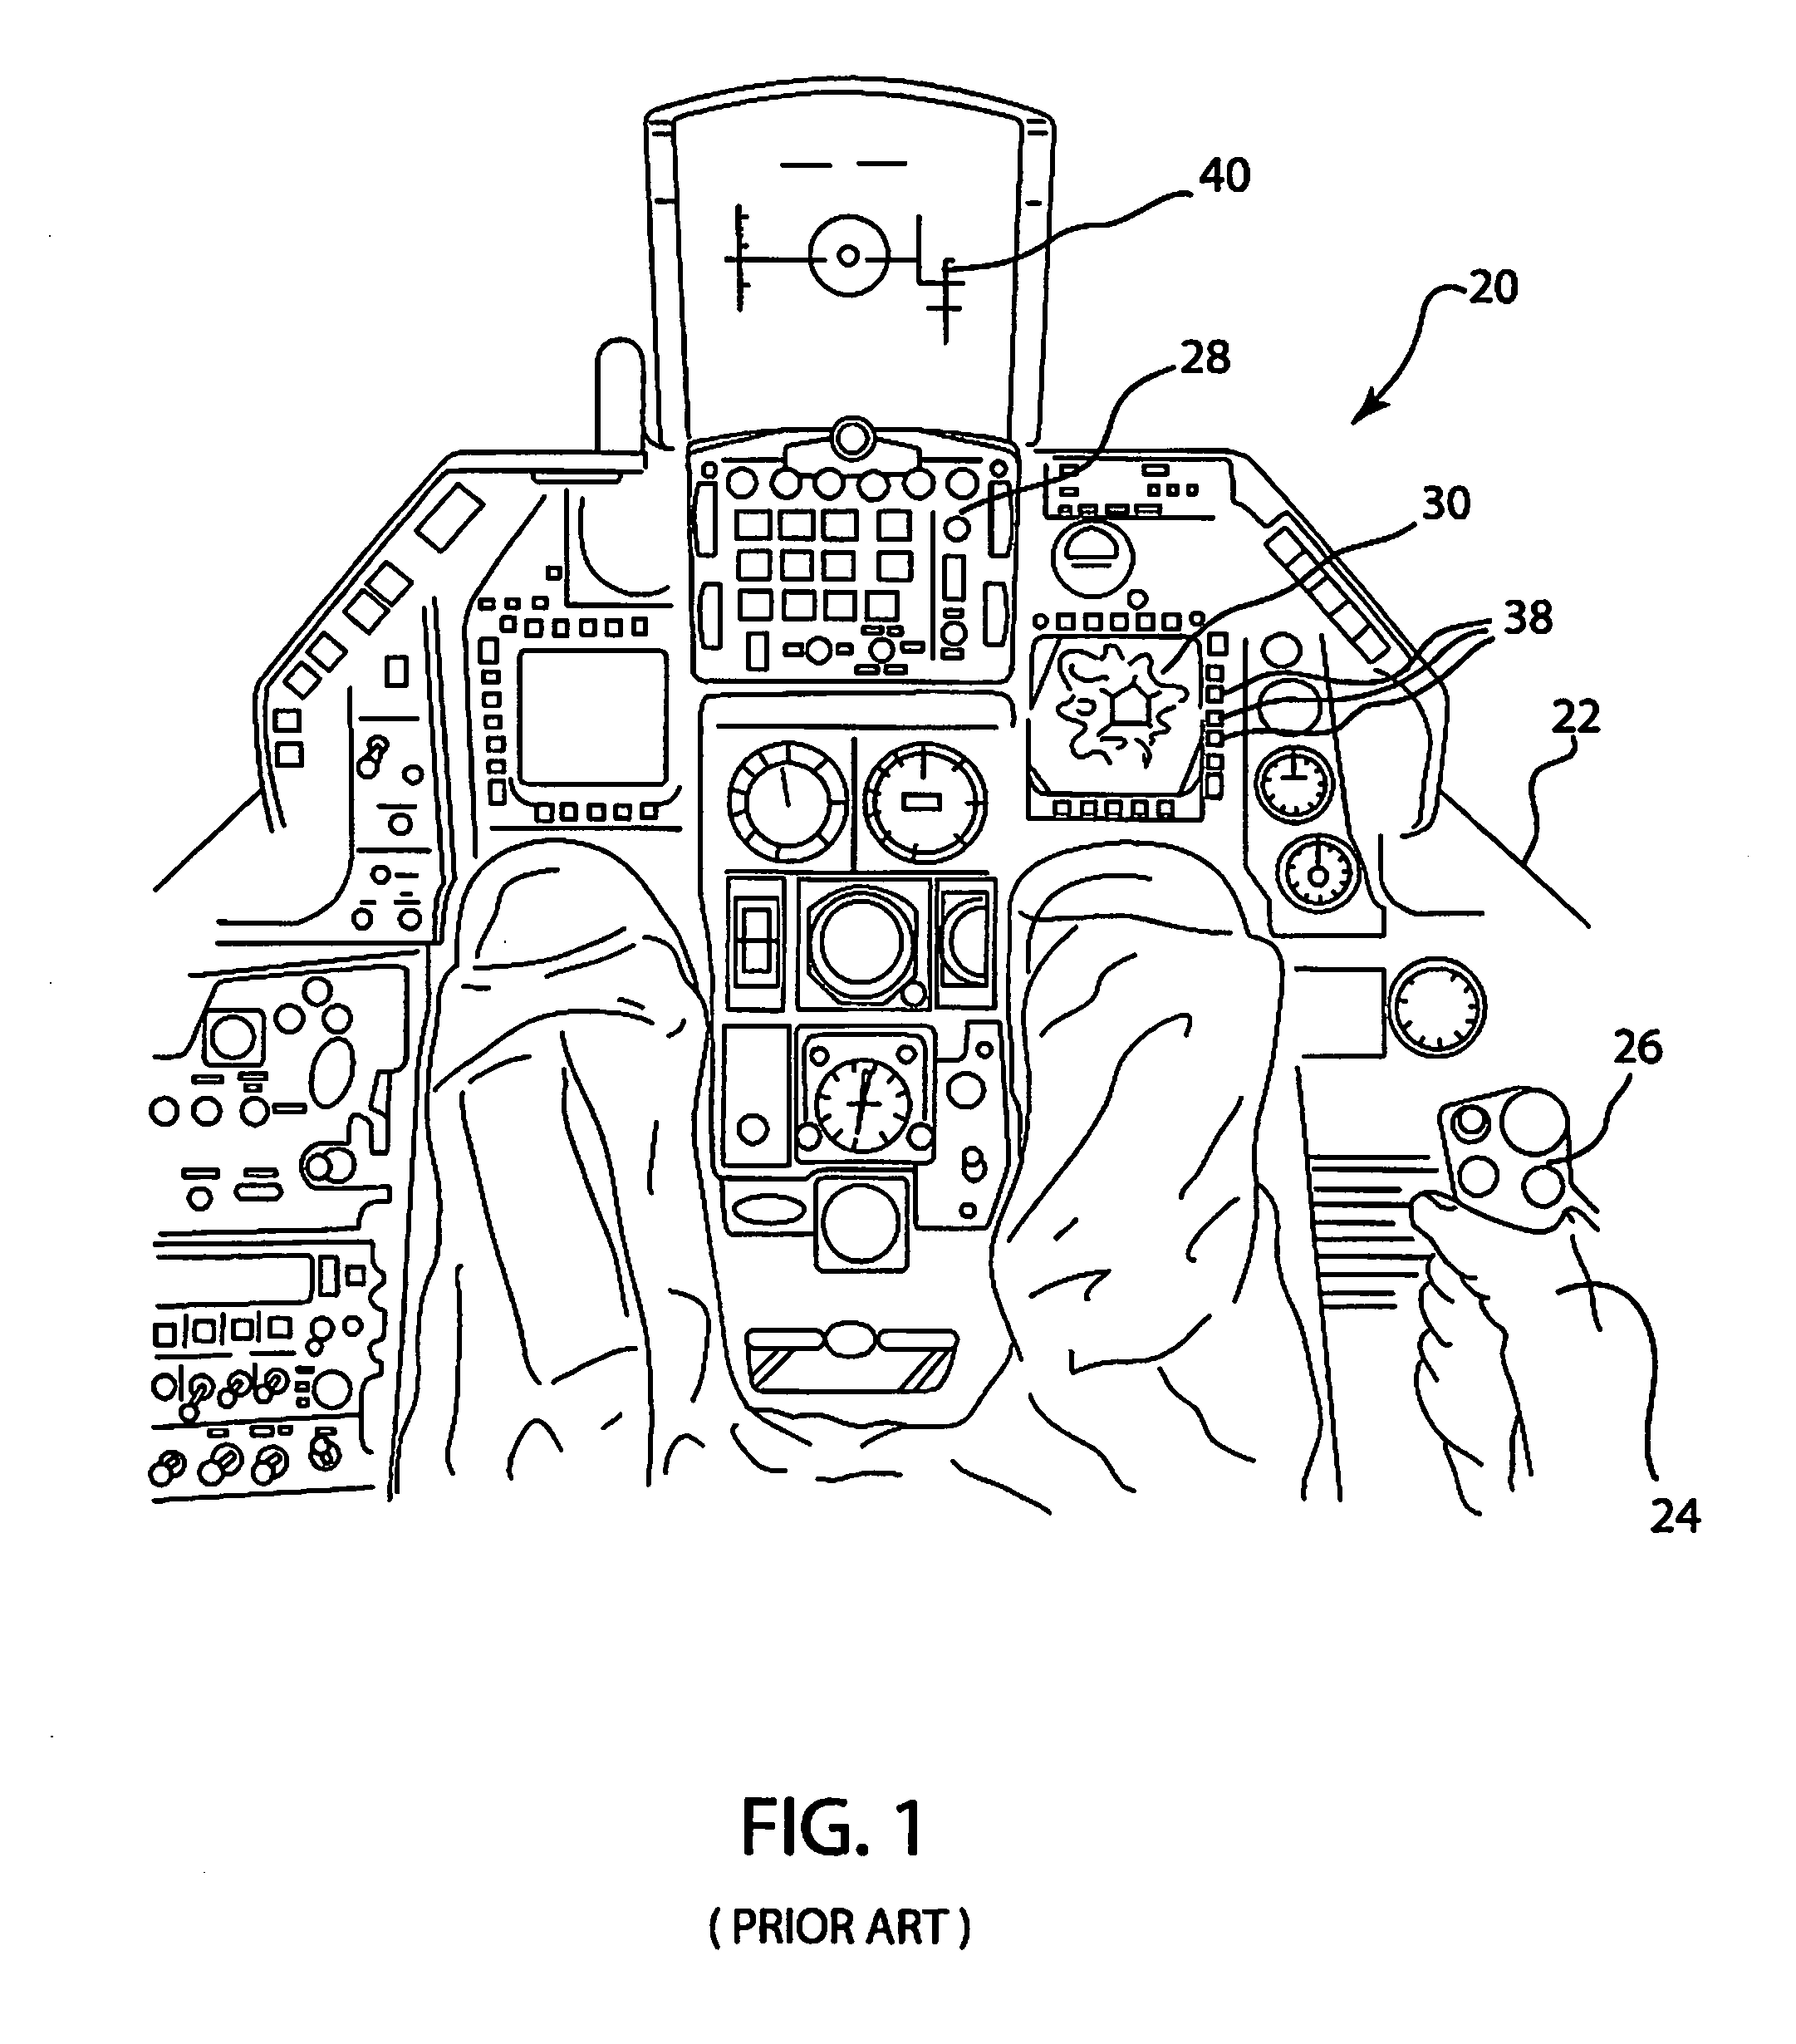 Method for cleaning and reconditioning FCR APG-68 tactical radar units